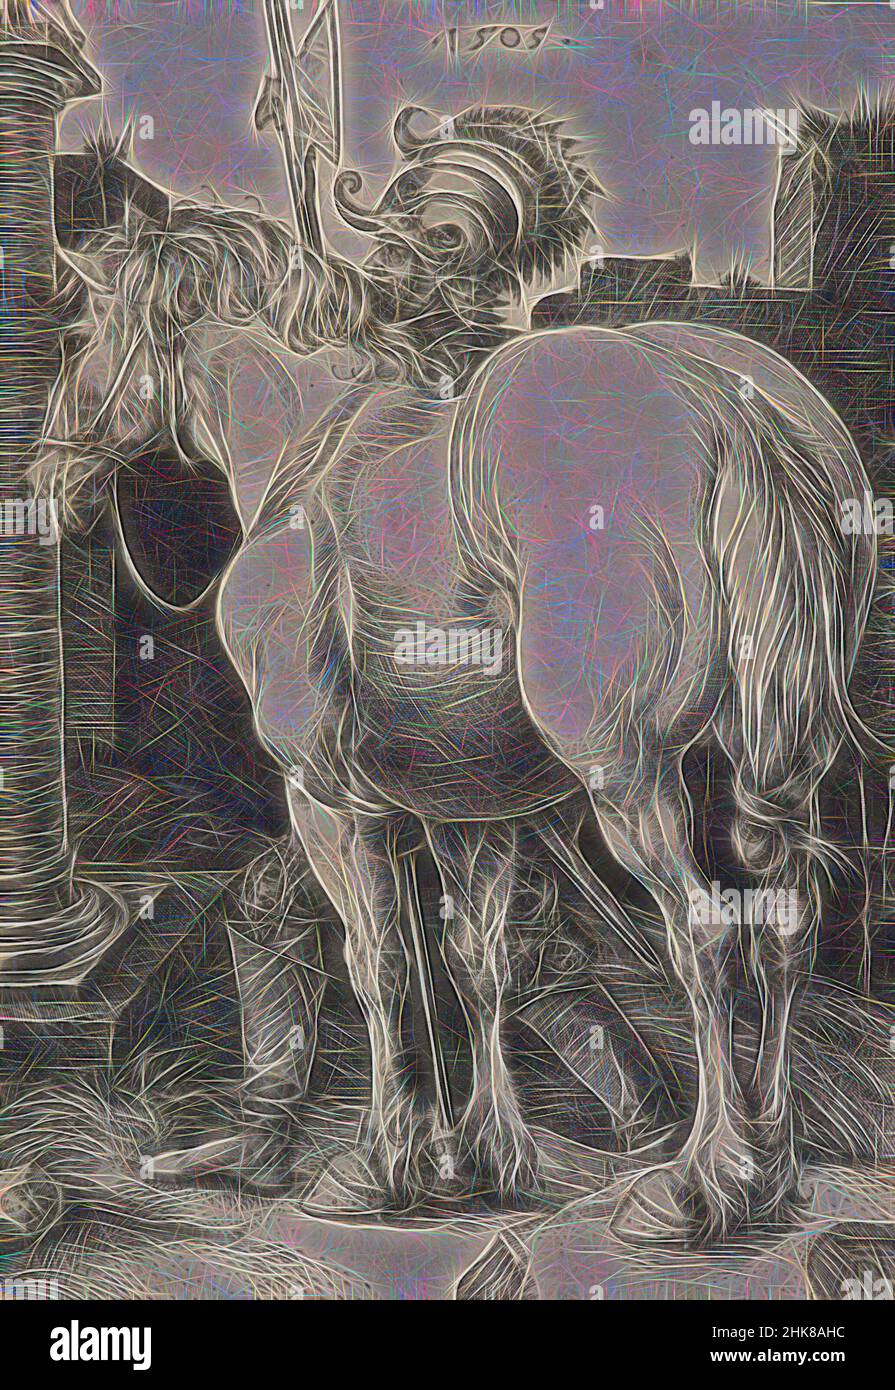 Inspired by The large horse., Albrecht Dürer, artist, 1505, Germany, engraving, As well as the human figure, horses played an important part in Albrecht Dürer’s lifelong obsession with ideal beauty and proportions. Here he rivals masters of the Italian Renaissance like Pisanello, Donatello, Mantegna, Reimagined by Artotop. Classic art reinvented with a modern twist. Design of warm cheerful glowing of brightness and light ray radiance. Photography inspired by surrealism and futurism, embracing dynamic energy of modern technology, movement, speed and revolutionize culture Stock Photo